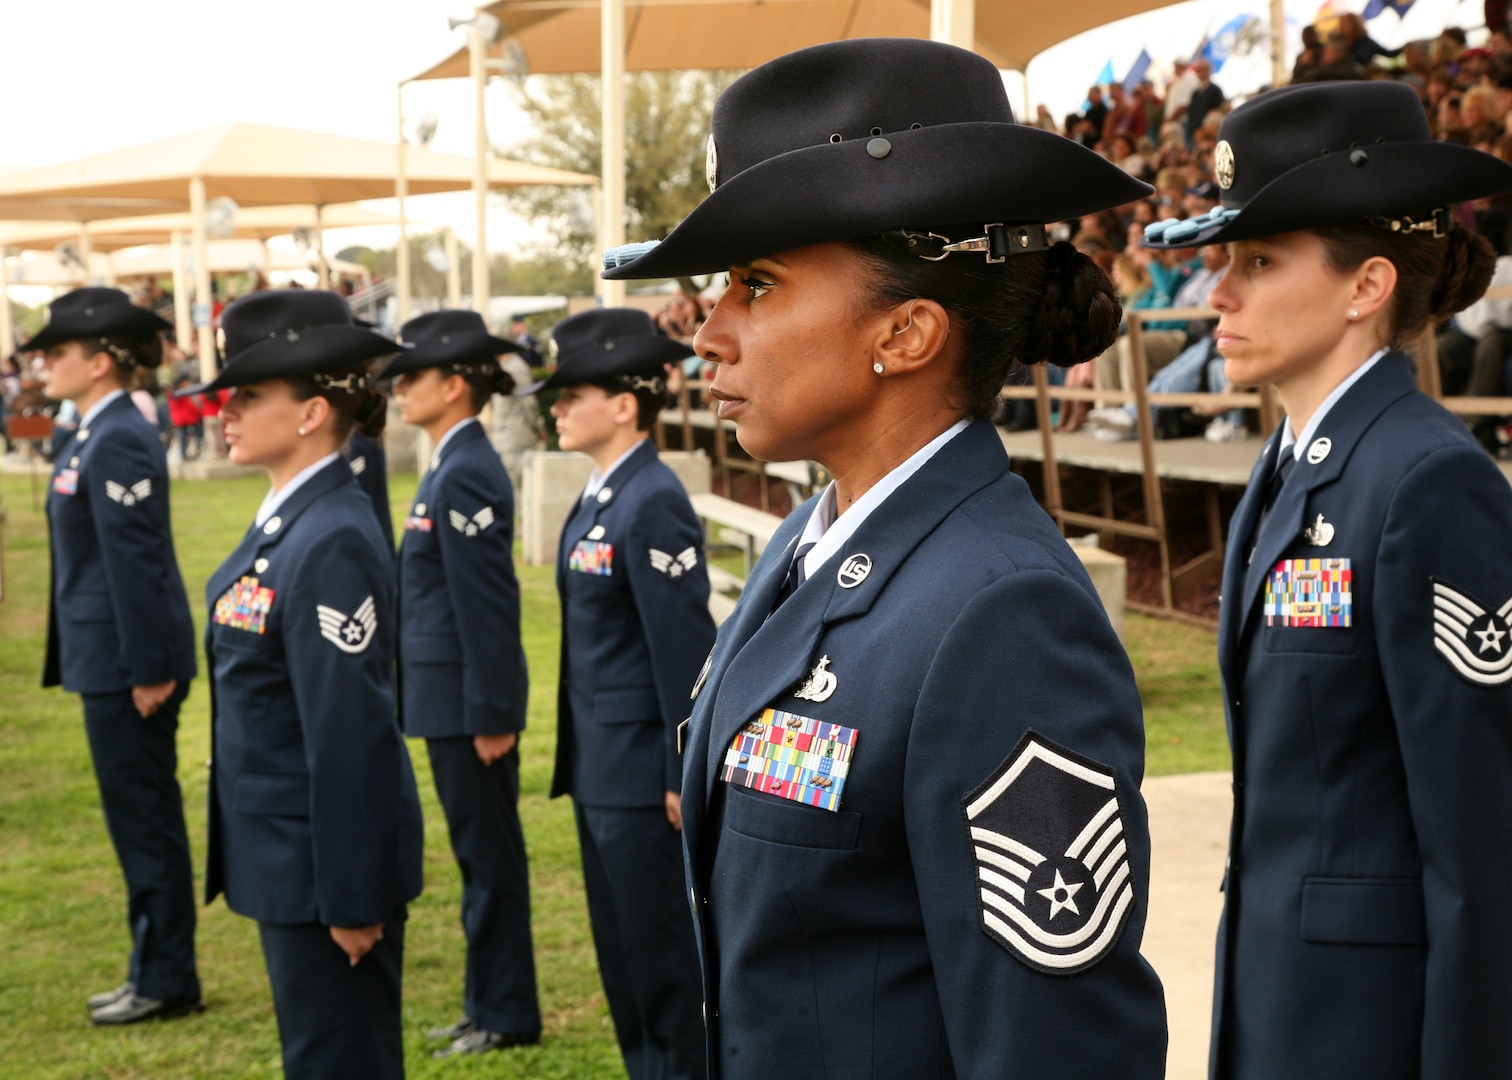 Master Sgt. LaTanya Dinkins (foreground), 320th Training Squadron, serves as the commander of troops during the Air Force Basic Military Training graduation parade March 19. Honoring Women's History Month, all staff and flight commander positions during the parade were filled by women from the 737th Training Group. (U.S. Air Force photo/Robbin Cresswell)